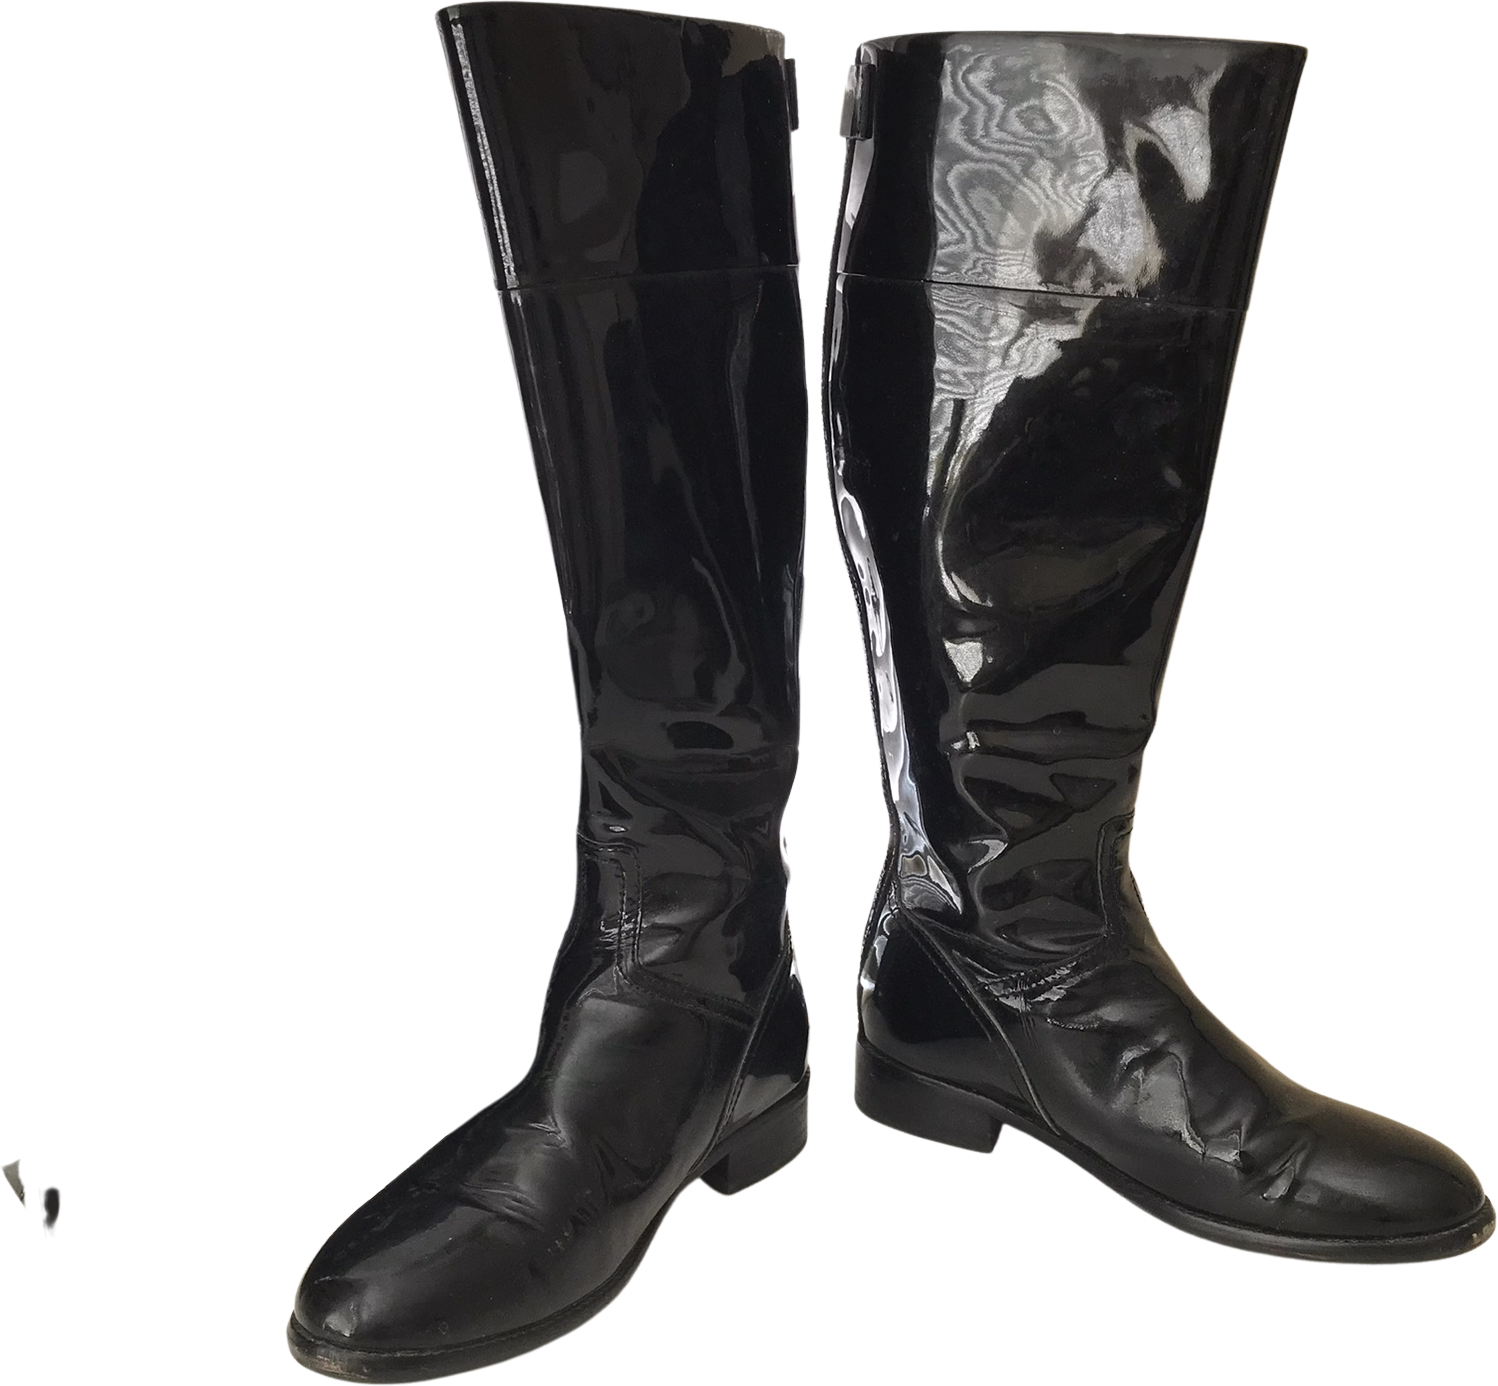 90s/00s Chanel Tall Riding Boots Patent Leather 41 By Chanel